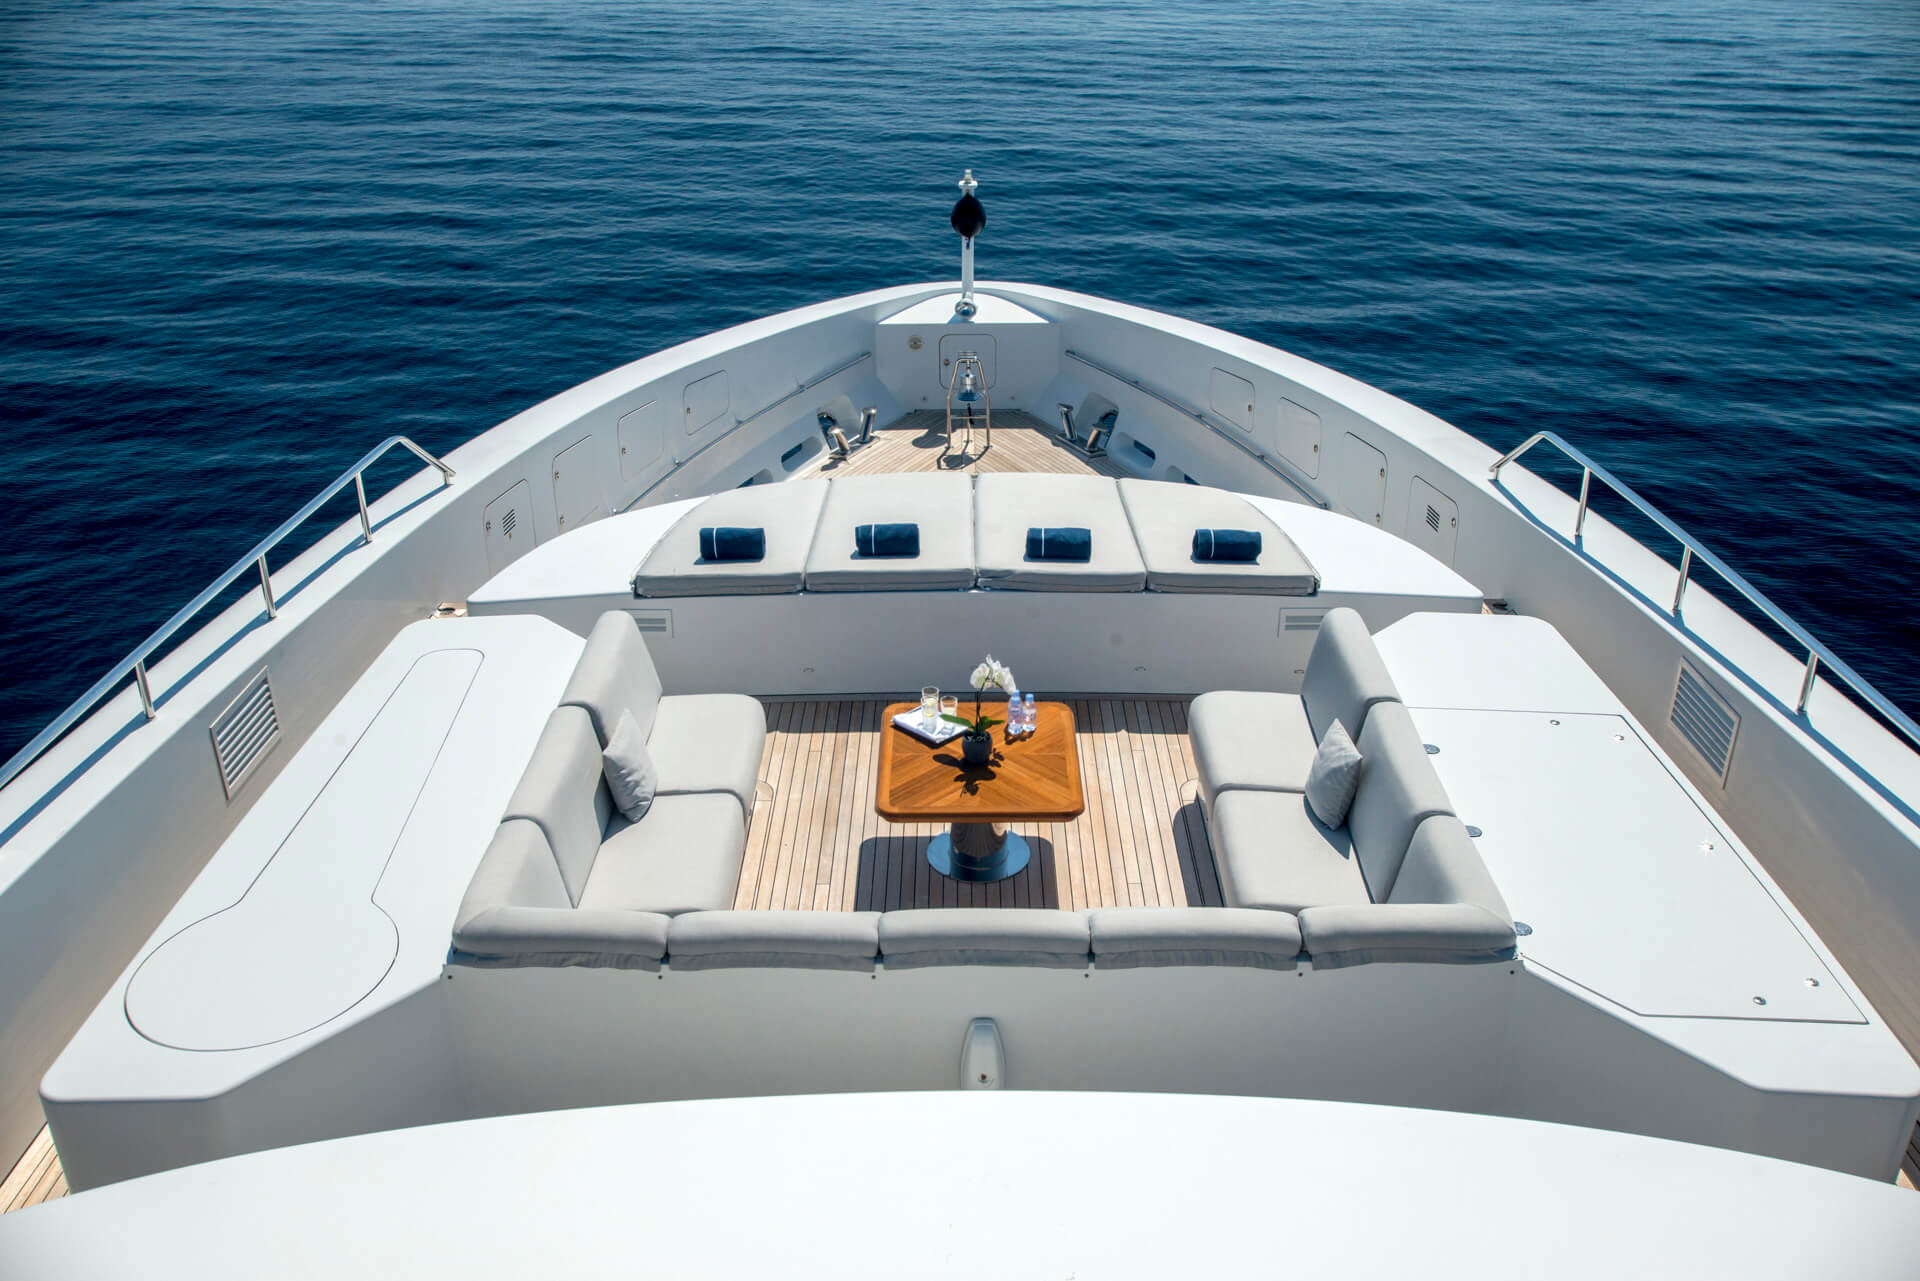 Bow of SIROCCO yacht